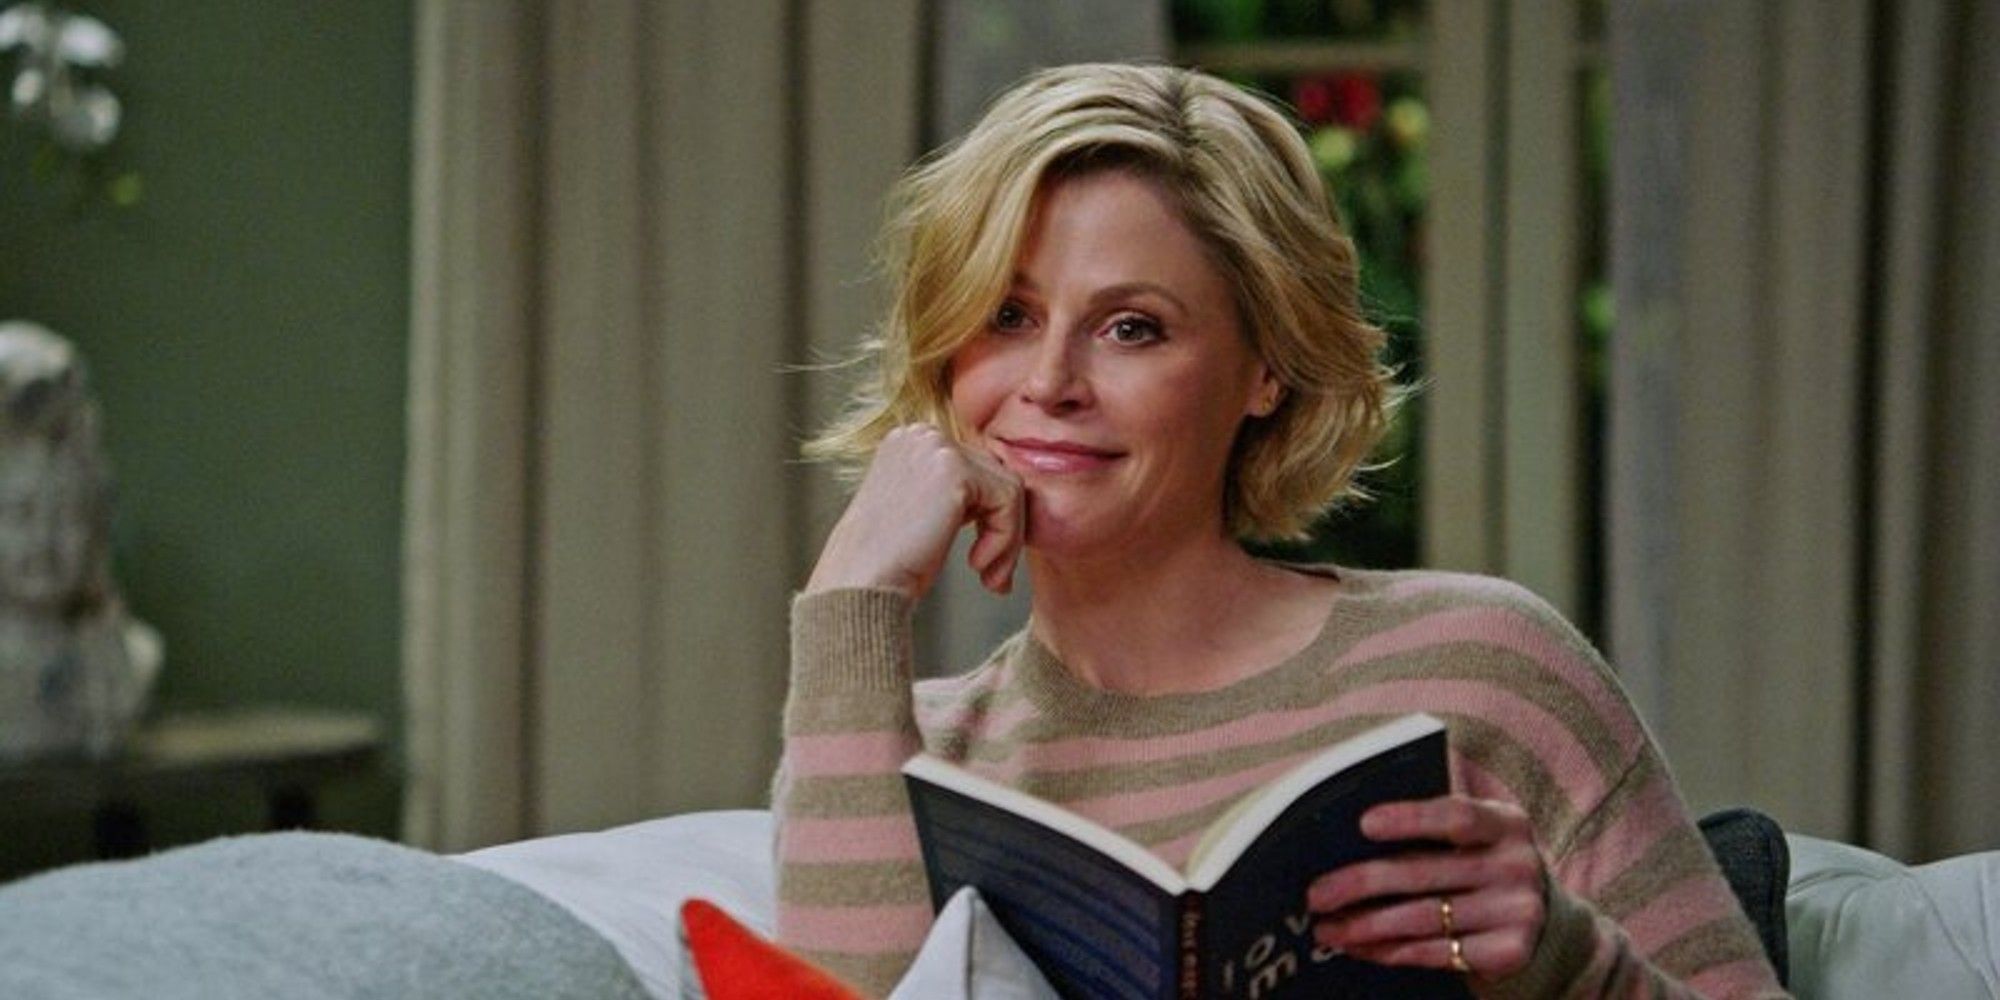 Julie Bowen as Claire Dunphy smiling while holding an open book in Modern Family